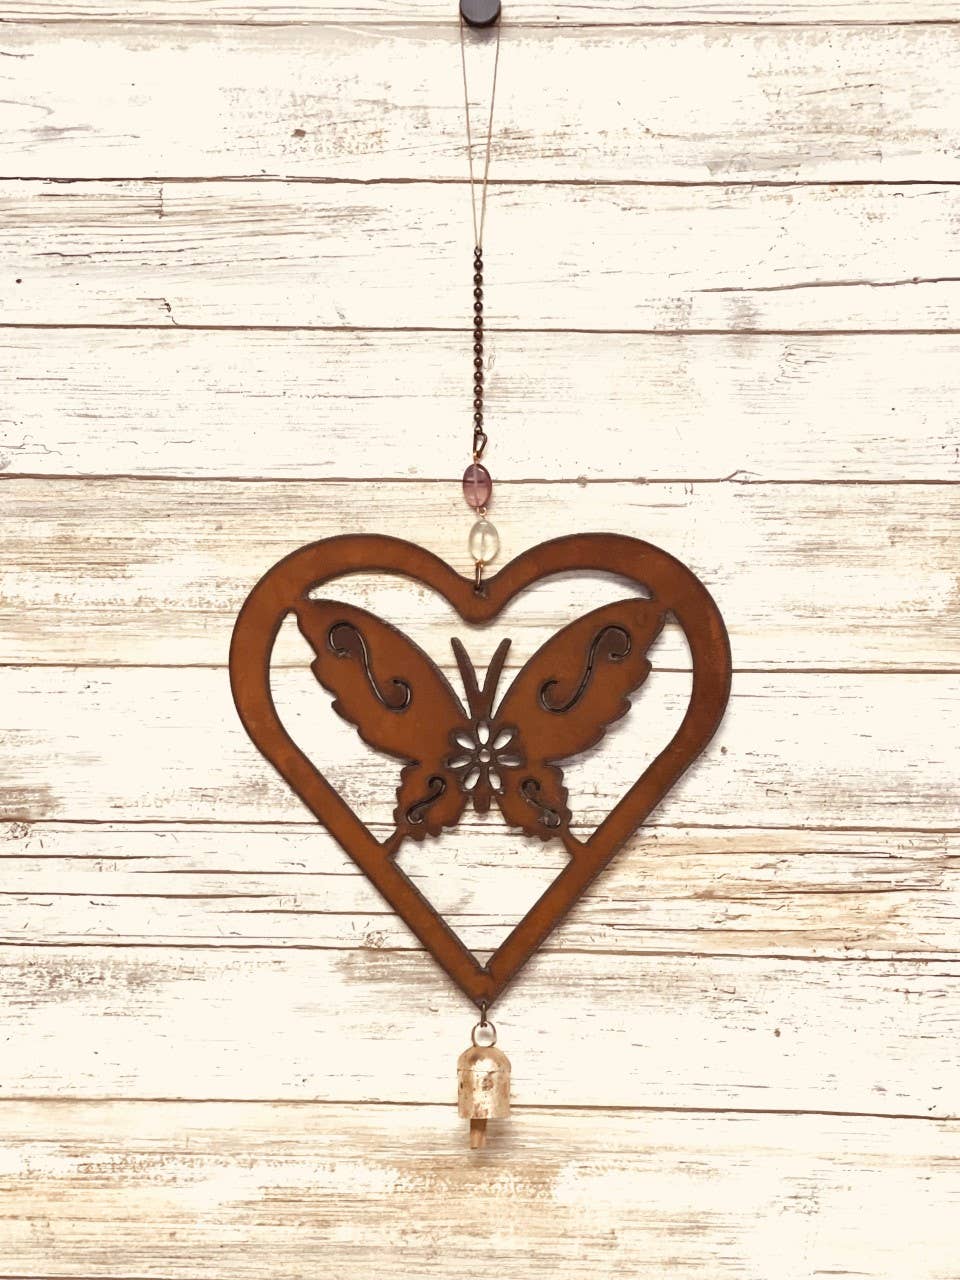 Heart Outline with Butterfly Garden Friend Chime Bell 9 Inch